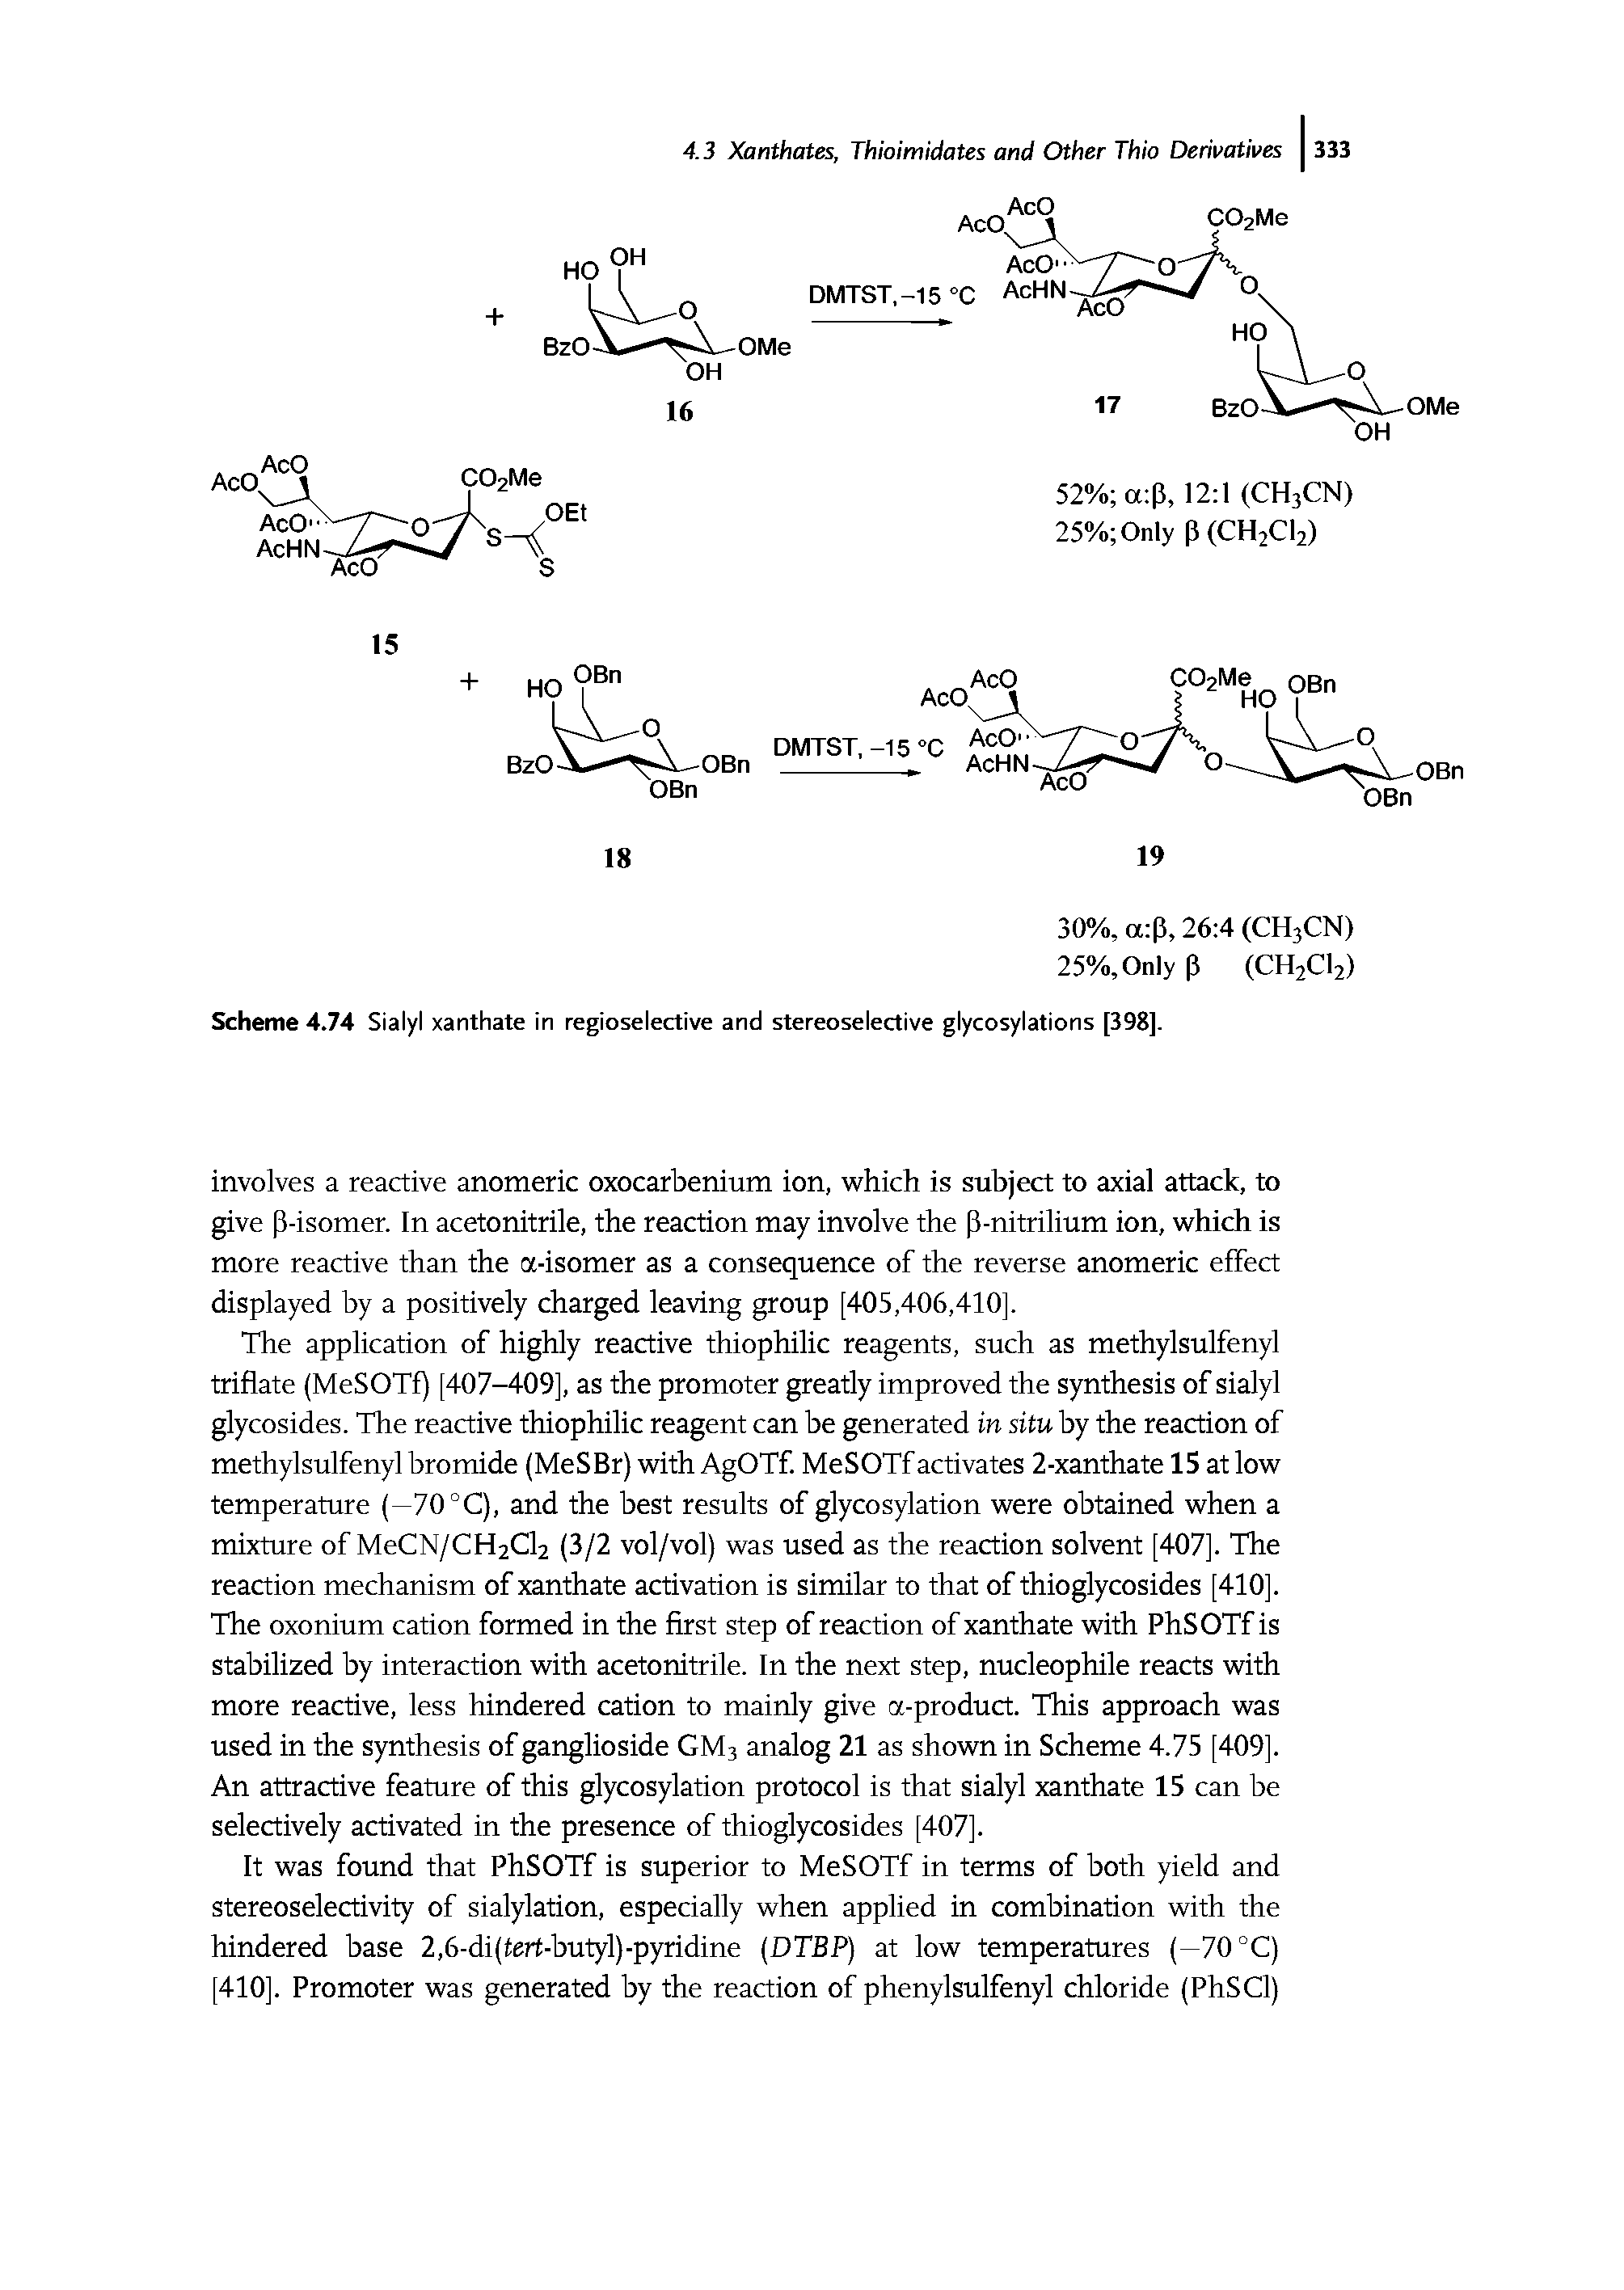 Scheme 4.74 Sialyl xanthate in regioselective and stereoselective glycosylations [398].